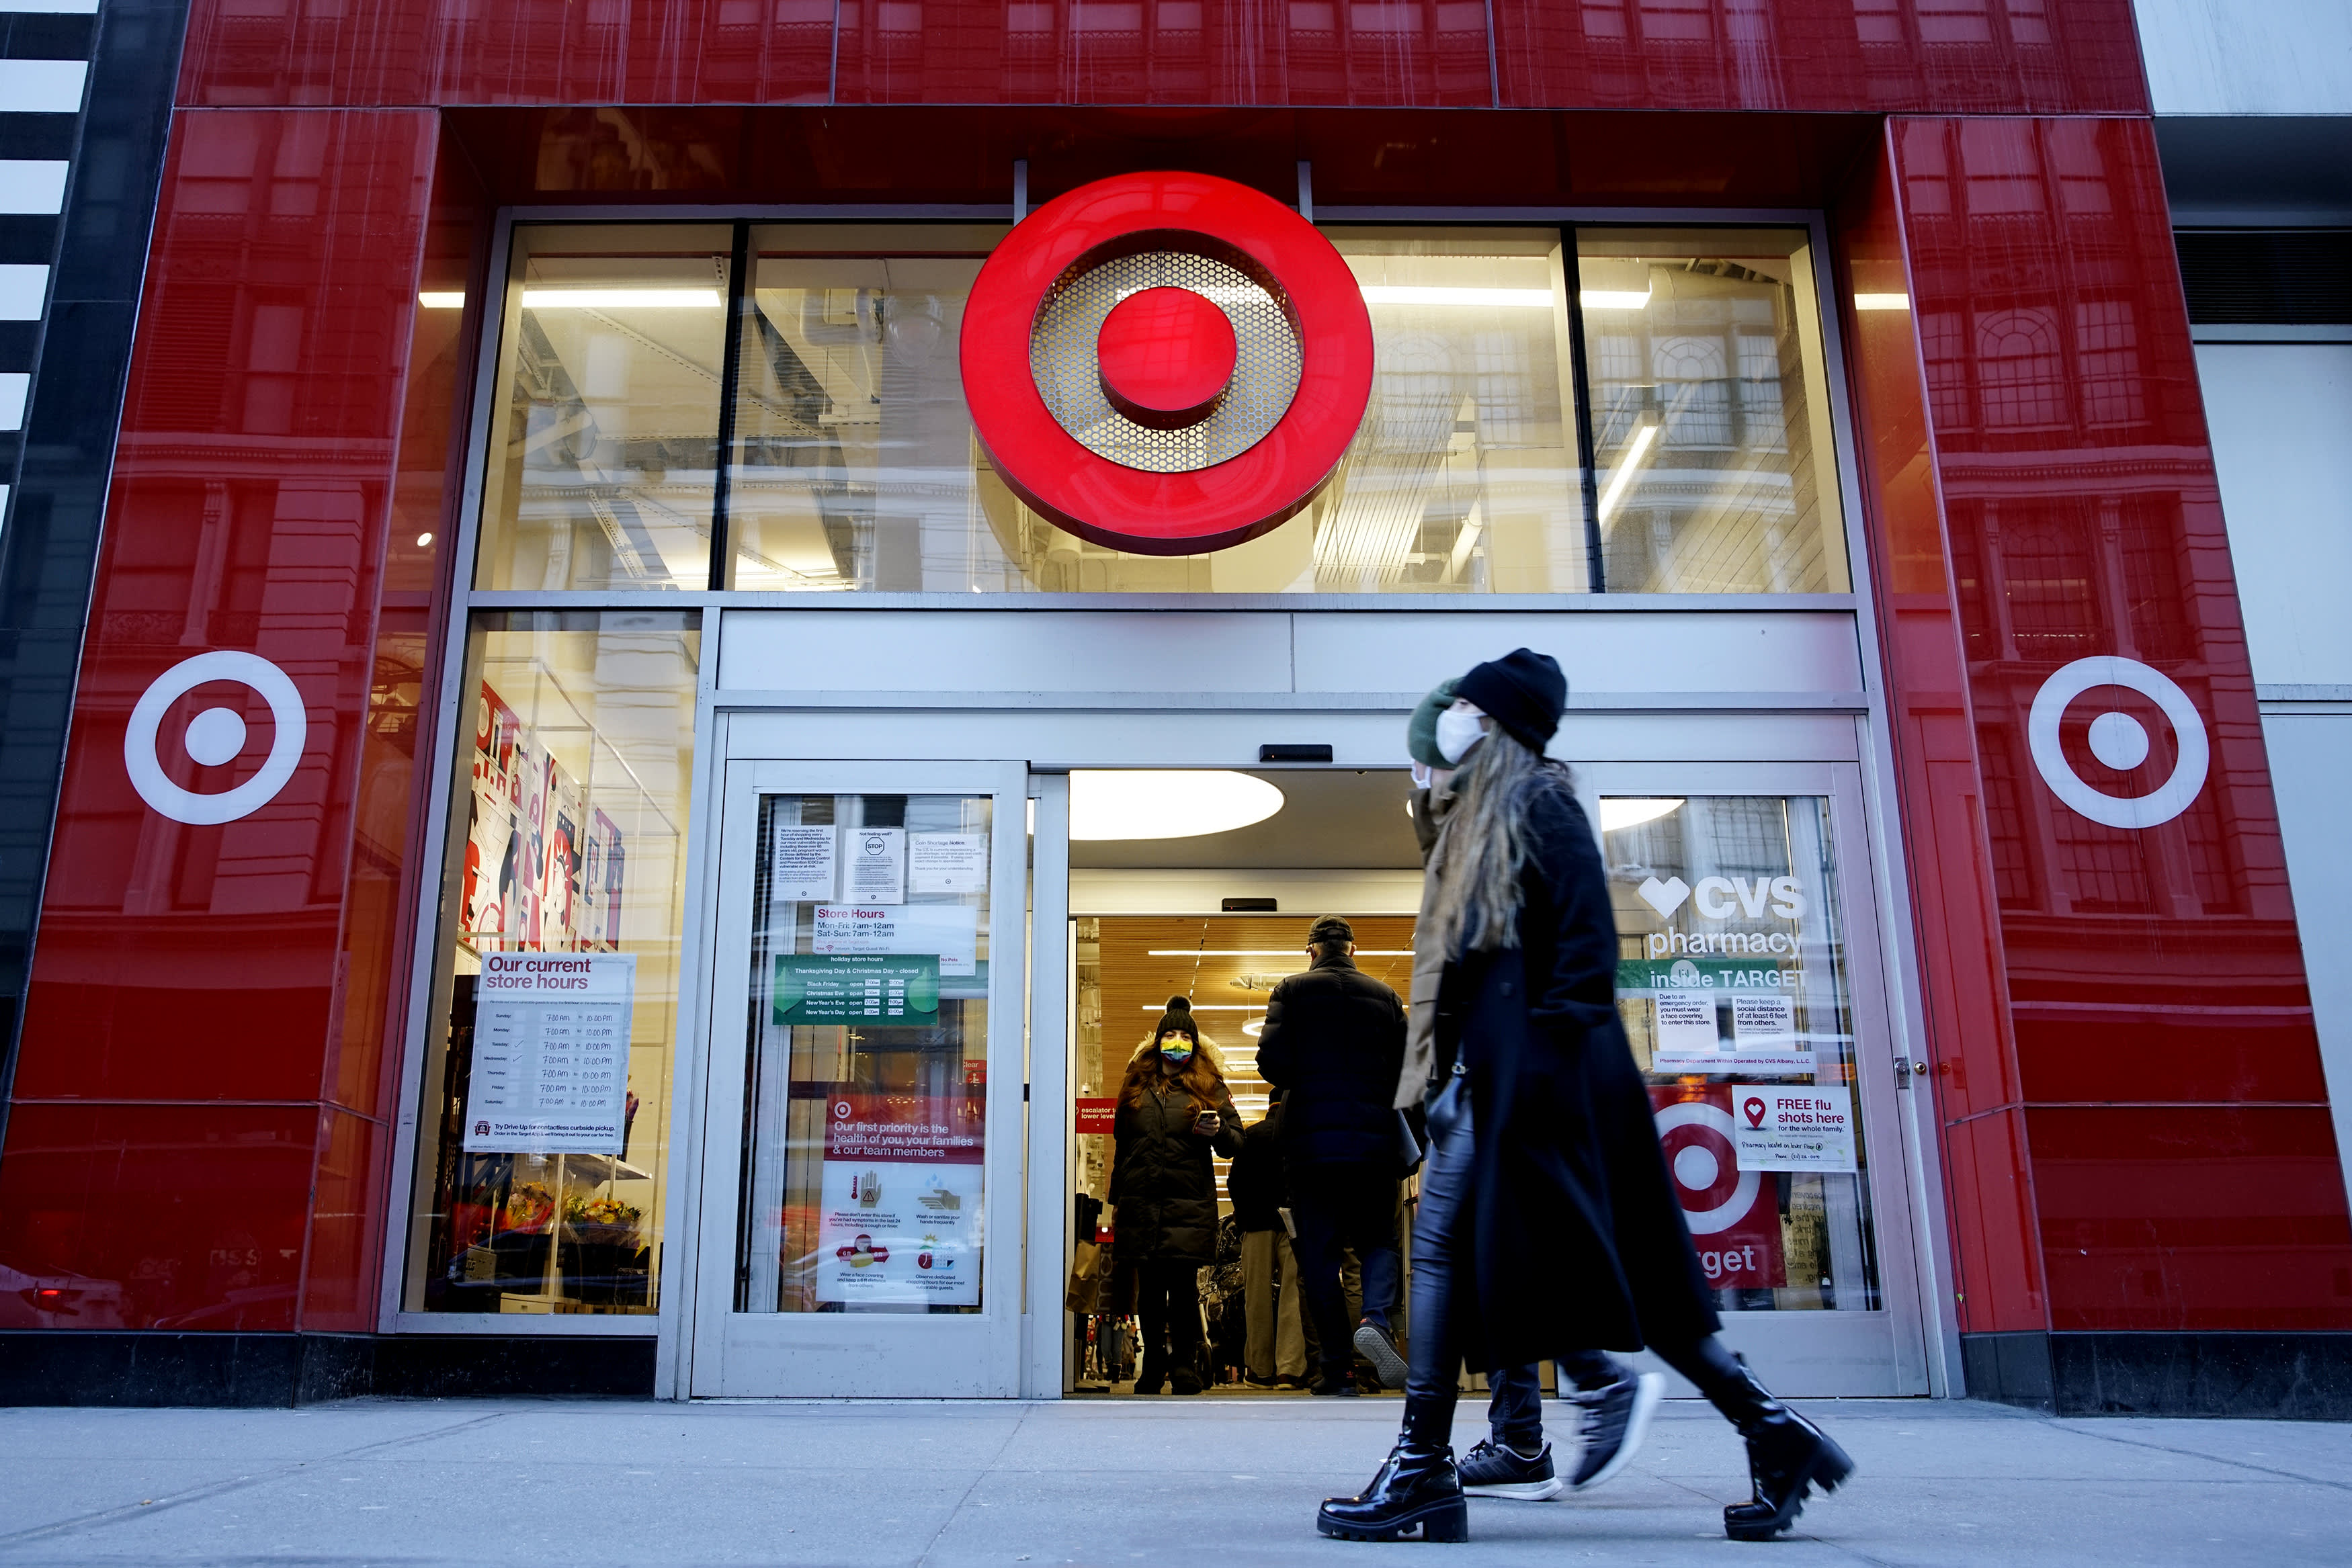 Target tops earnings estimates but shares fall as retailer focuses on keeping customer prices low – CNBC